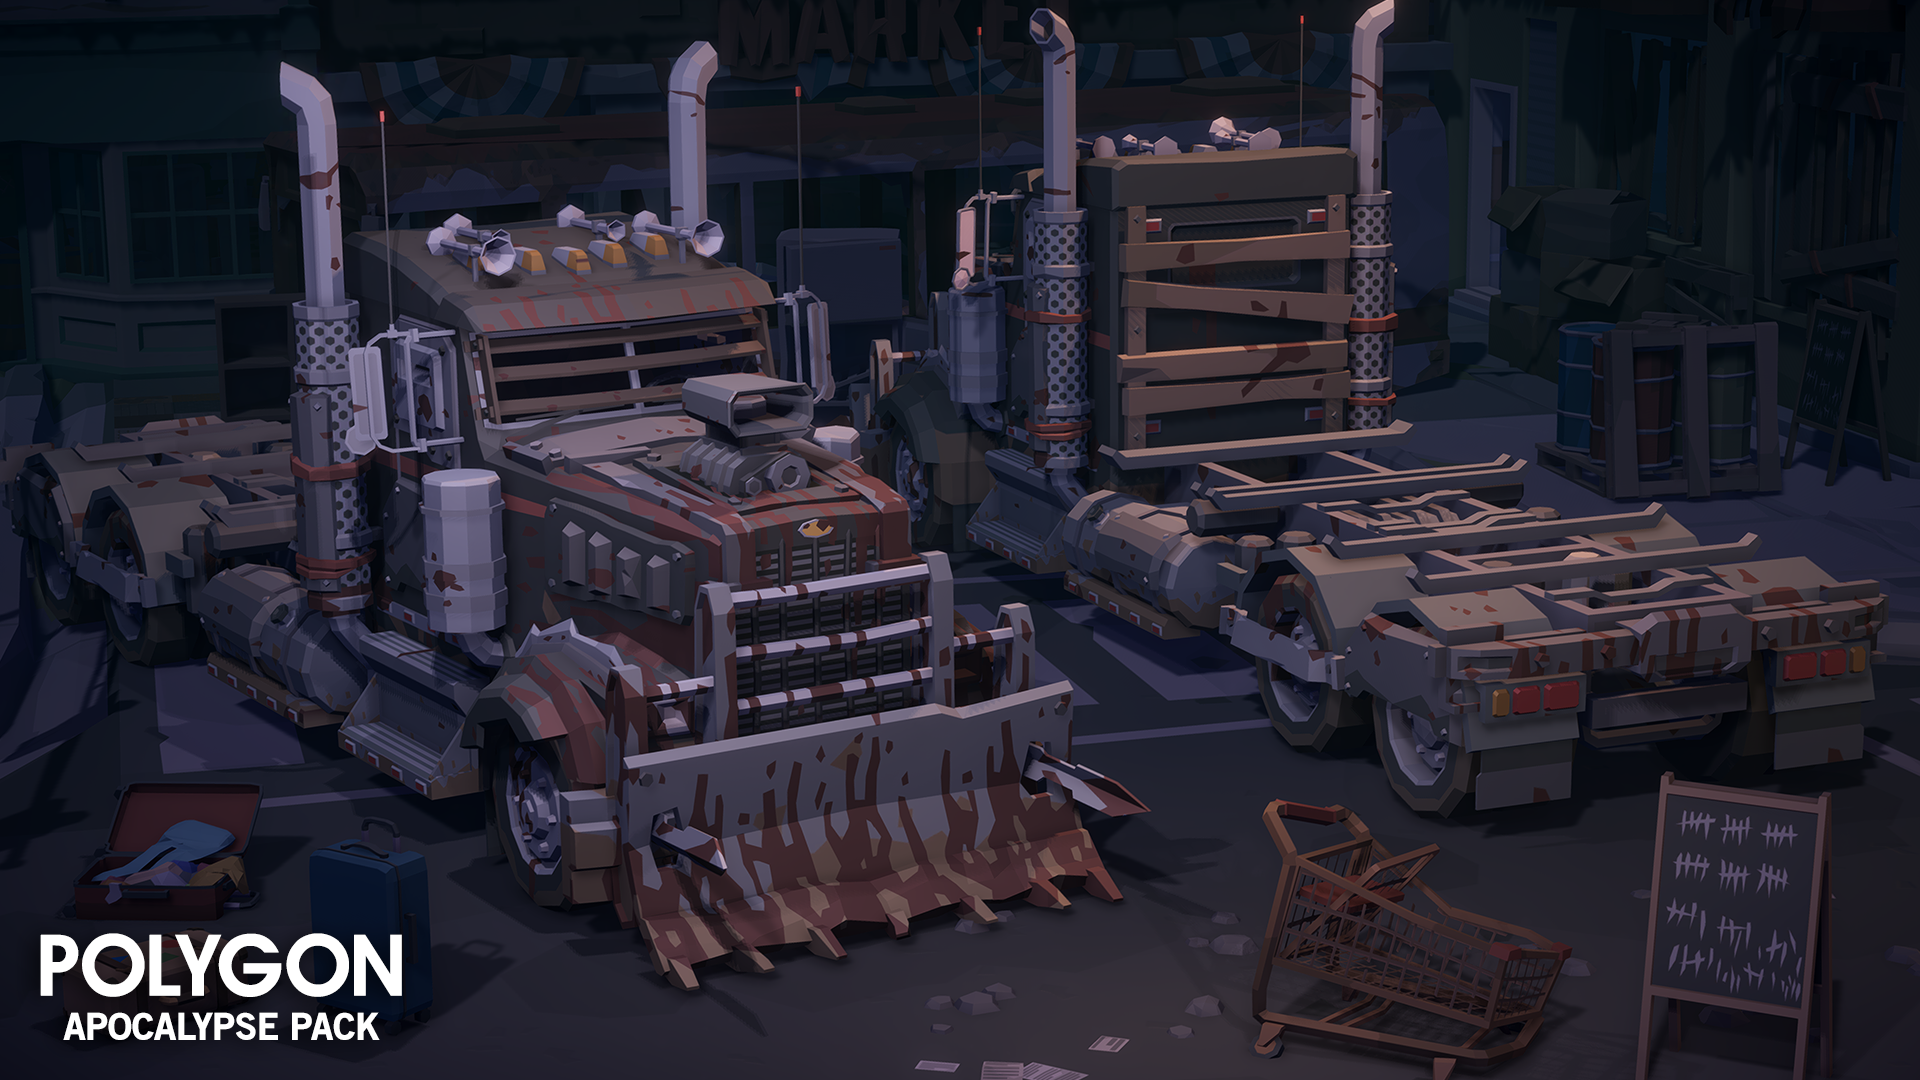 Apocalypse Pack 3D low poly wasteland large truck and rig assets for game development